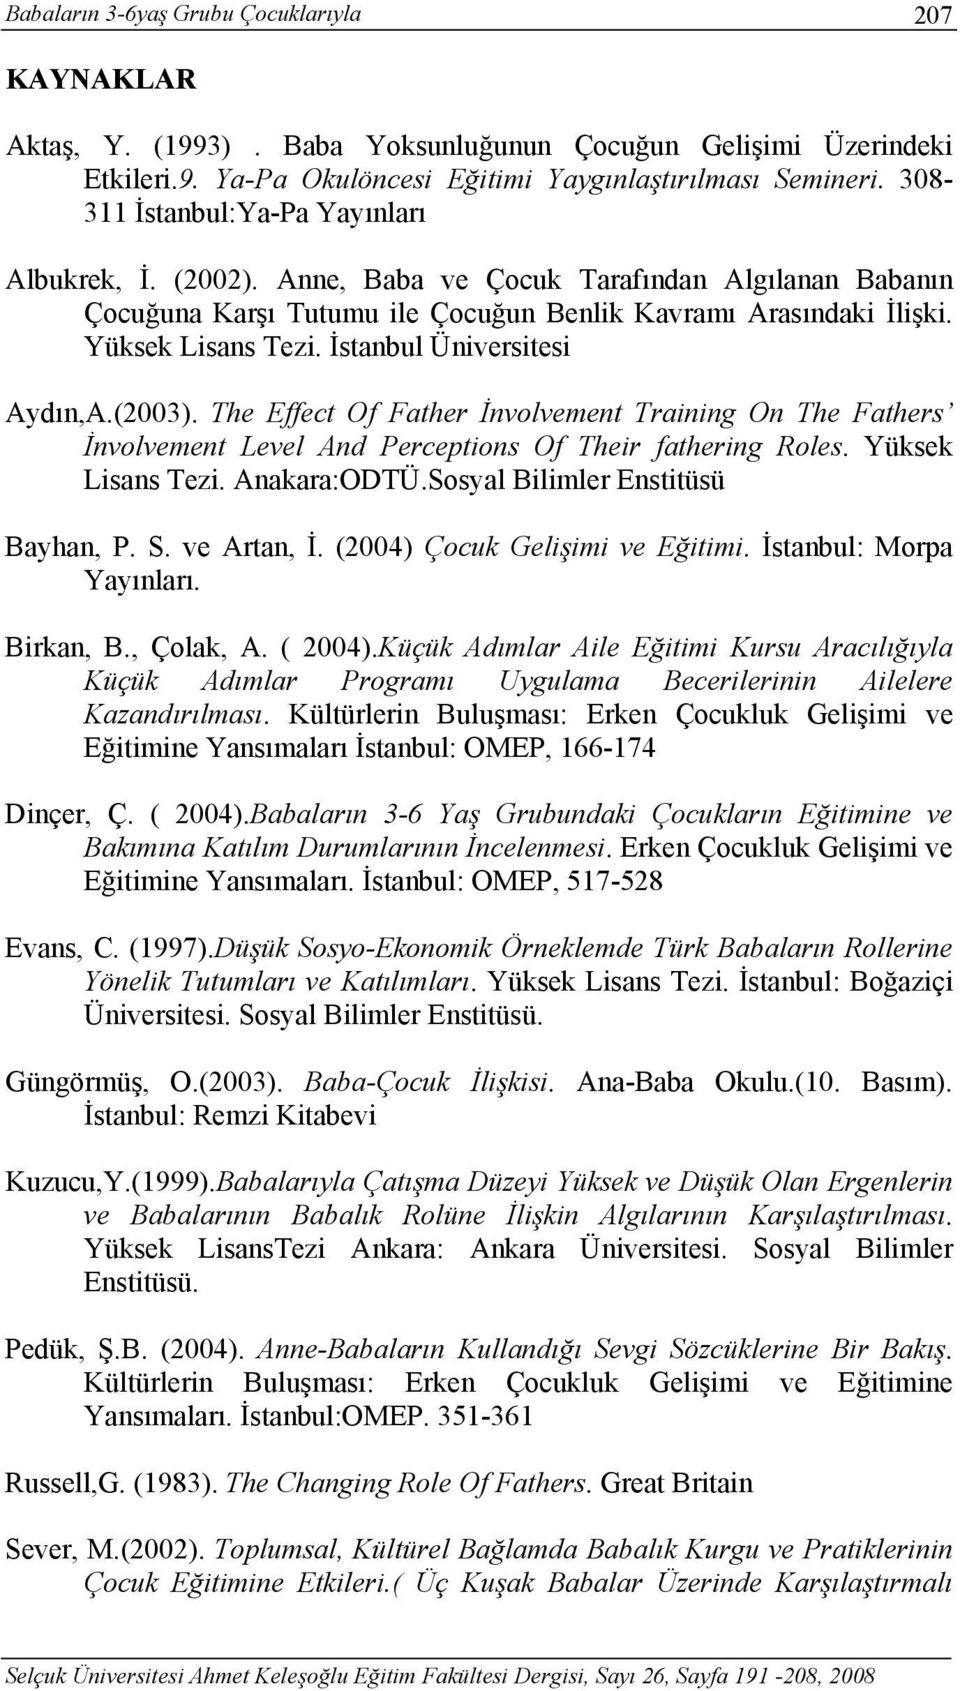 İstanbul Üniversitesi Aydın,A.(2003). The Effect Of Father İnvolvement Training On The Fathers İnvolvement Level And Perceptions Of Their fathering Roles. Yüksek Lisans Tezi. Anakara:ODTÜ.